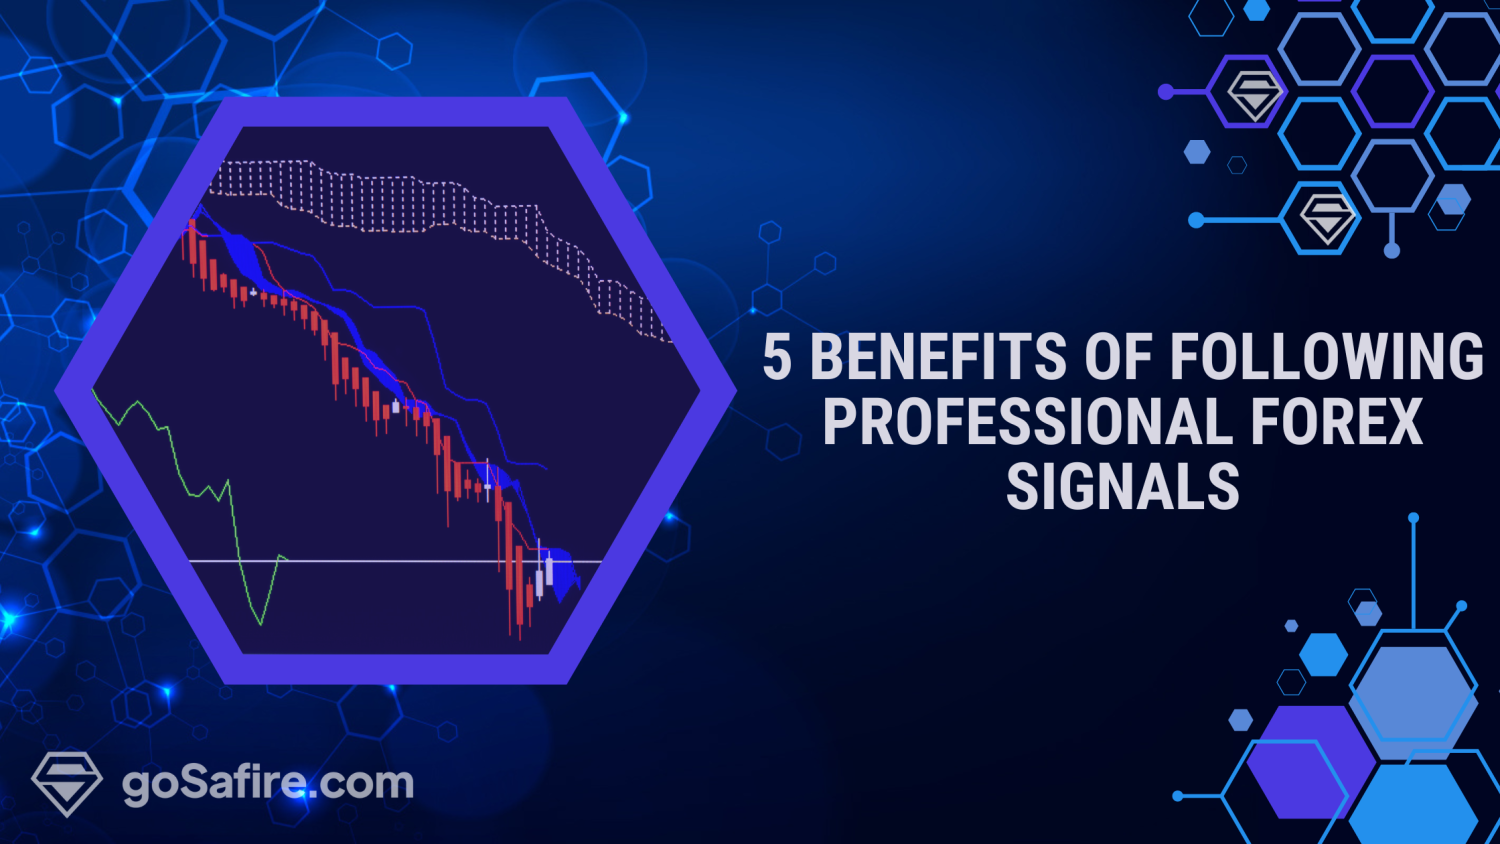 The Top 5 Benefits of Following Professional Forex Signals